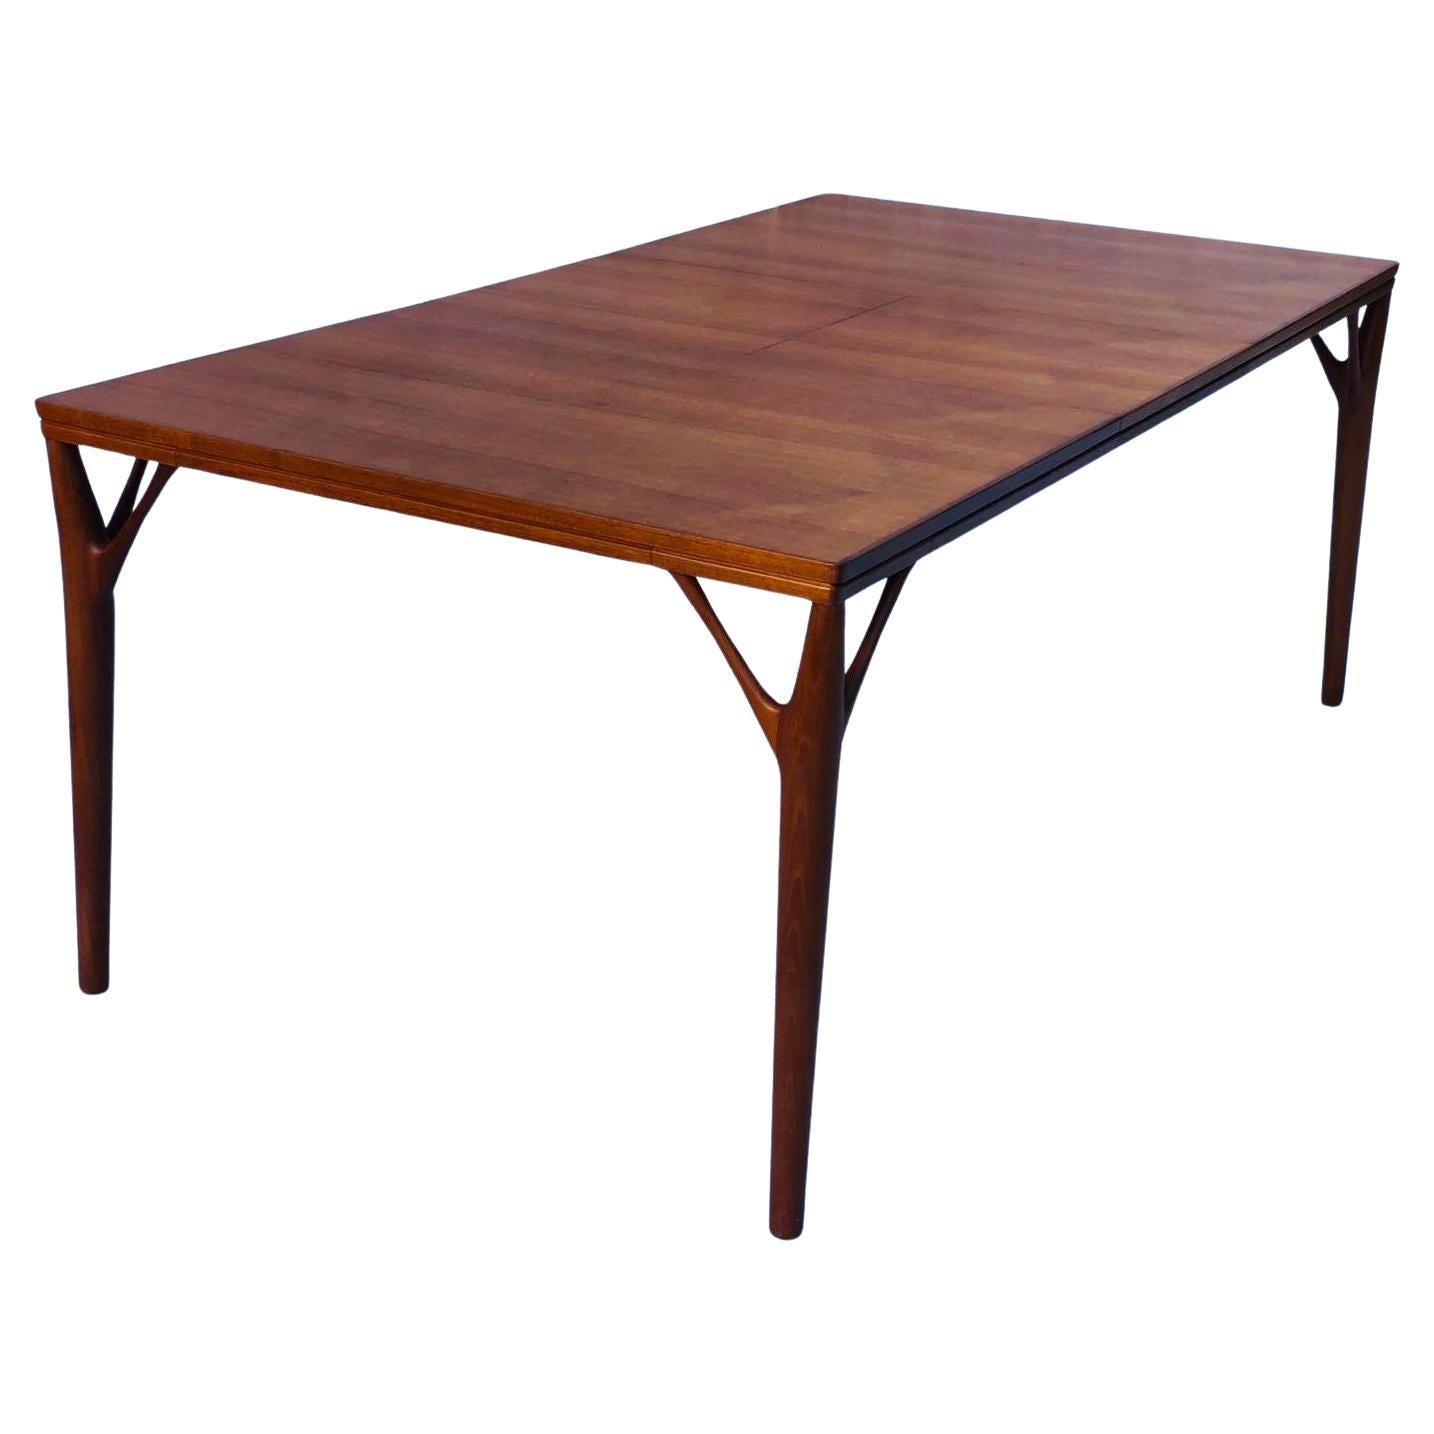 1960s Danish Teak Willy Sigh 'Tree Leg' Dining Table Model 180 by H Sigh & Søn  For Sale